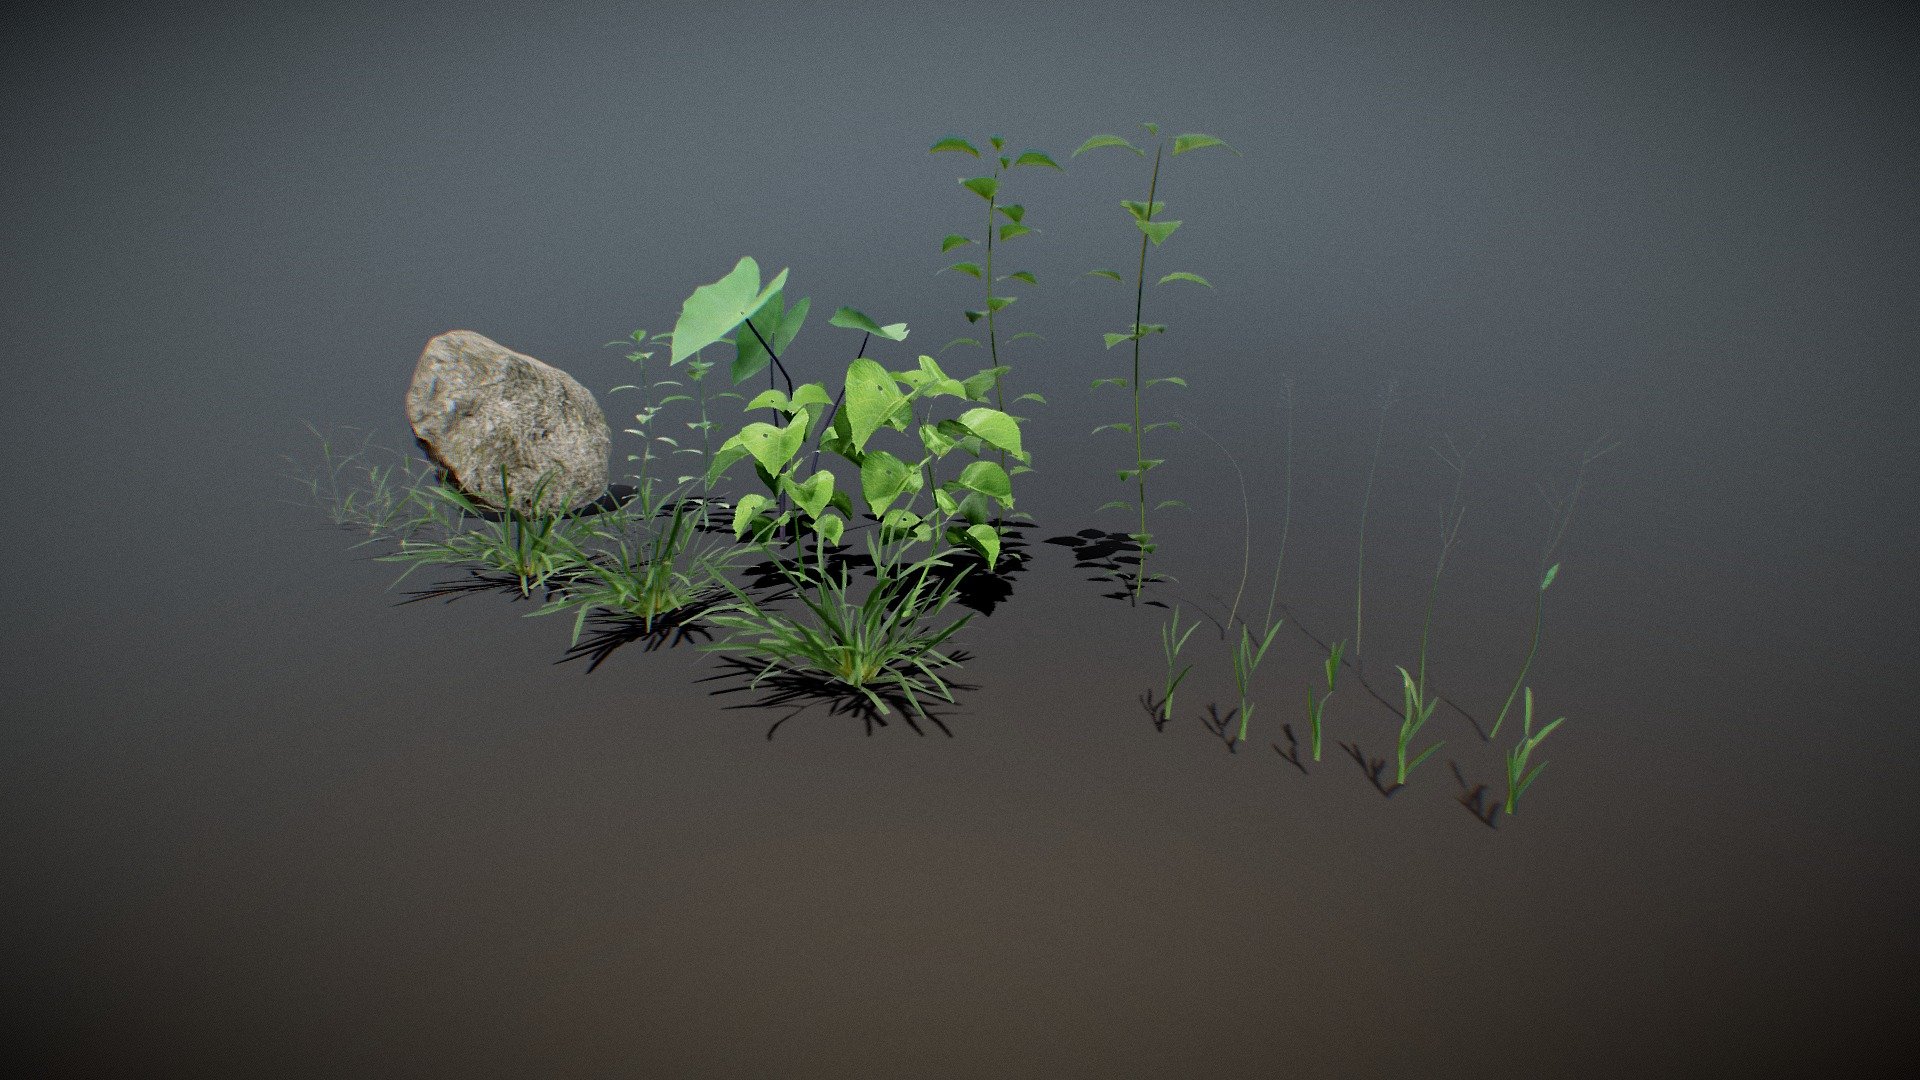 This my new Nature asset packVol_01,ready to be rendered in any environment.
It will always appear realistic in any lighting.
The polygons are reduced to minimum for optimum performance in render times.This pack includes many different types of highquality textures for each individual 3d assset.This models are made without any add
itional plugins.

This pack includes various types of vegetations including grass and weeds.

This pack has total 12 different 3d assets

-including 2 different types of seed head,
5 various grass strands, one huge rock, 
2 leafyweed, 3 colocasia plant, 4 long grasses, 
3grass clumps, 
3 grassyweed, 
2 small plant and 
2 tall plants 3d model